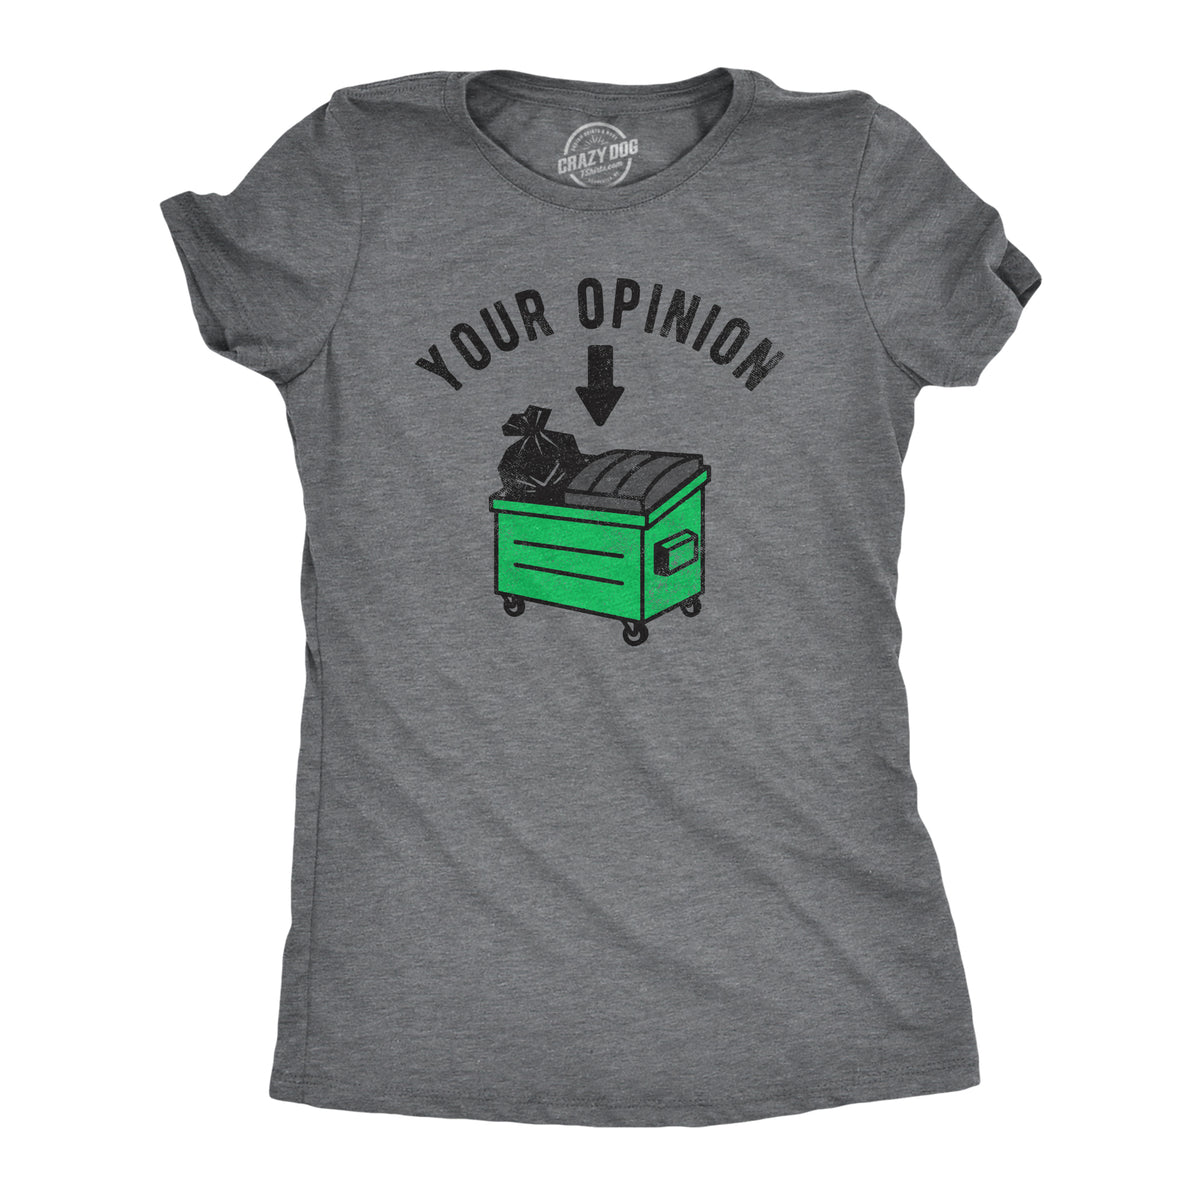 Funny Dark Heather Grey - OPINION Your Opinion Dumpster Womens T Shirt Nerdy sarcastic Tee